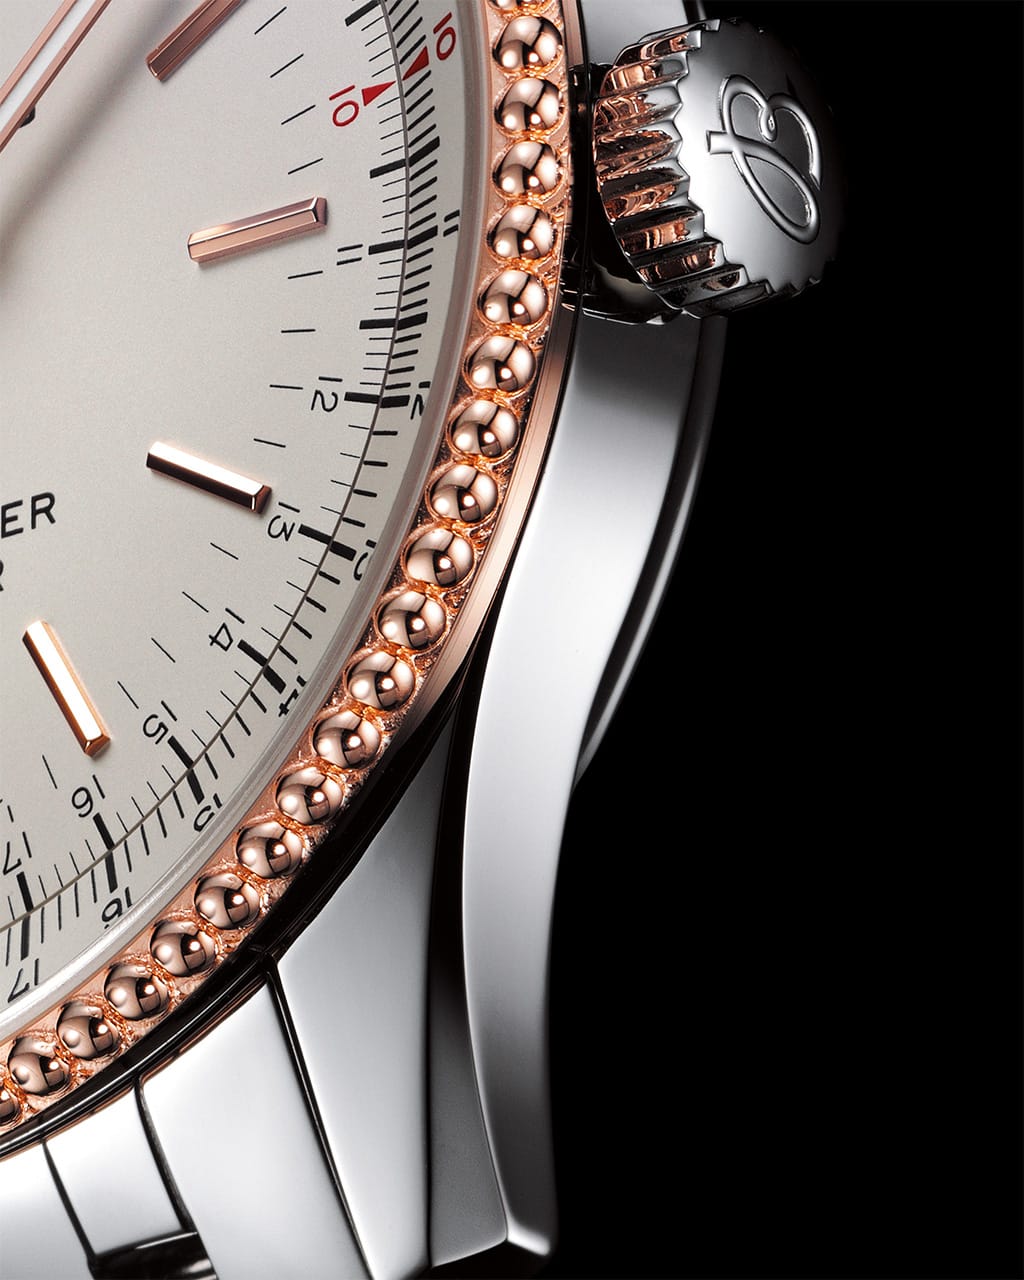 Christopher Ward Replica Watches